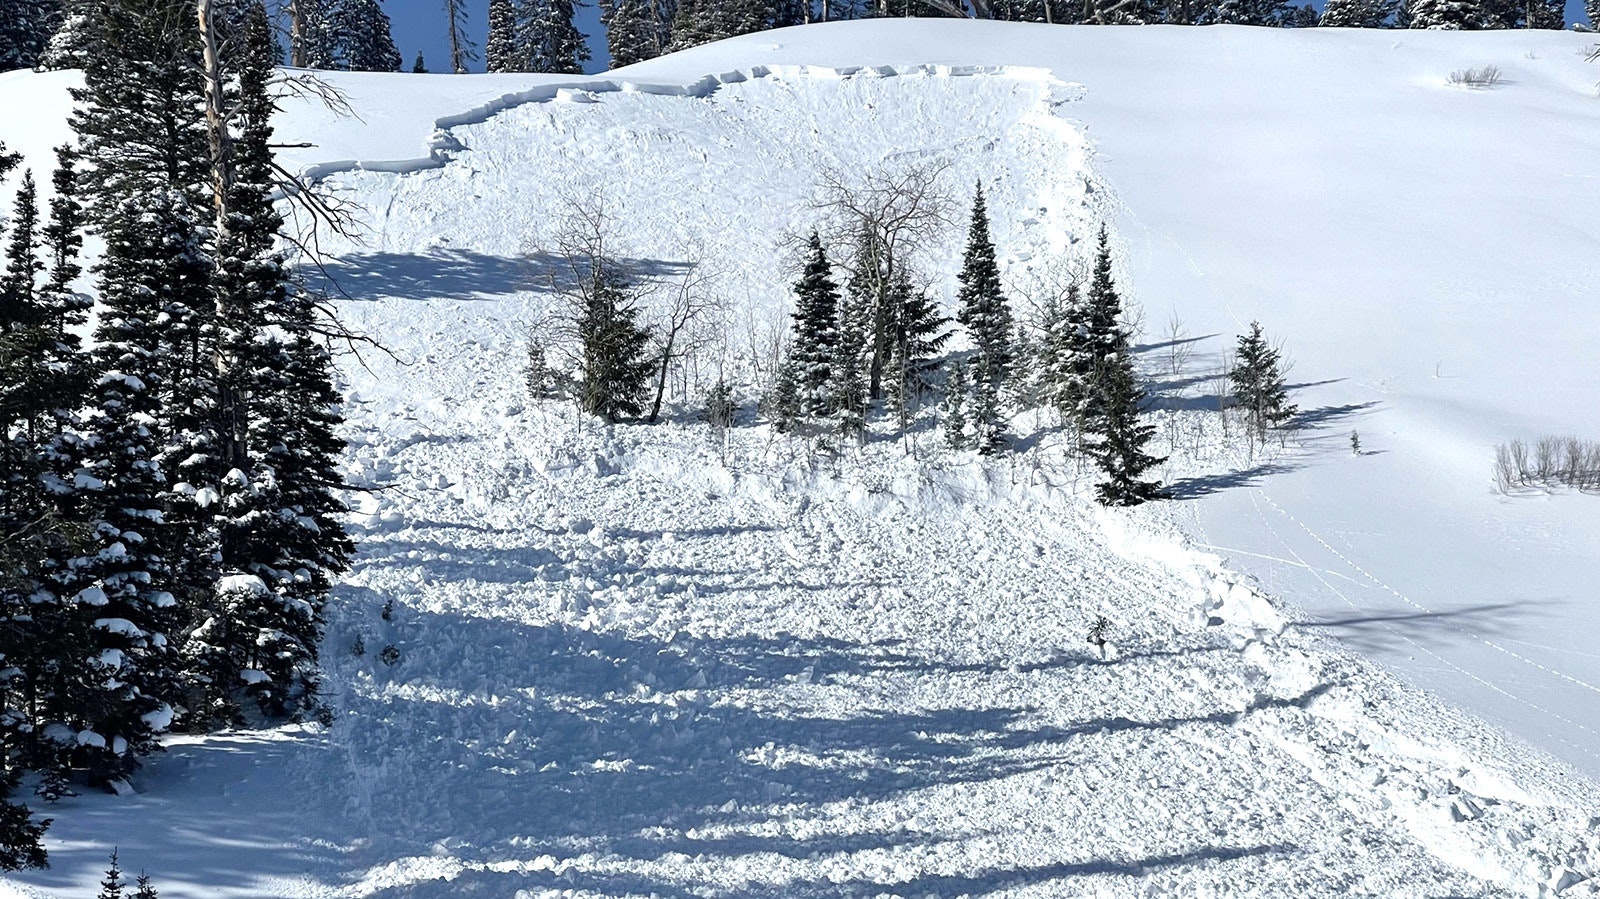 Abundant avalanche activity has been noted in recent days throughout the northwestern Wyoming region.